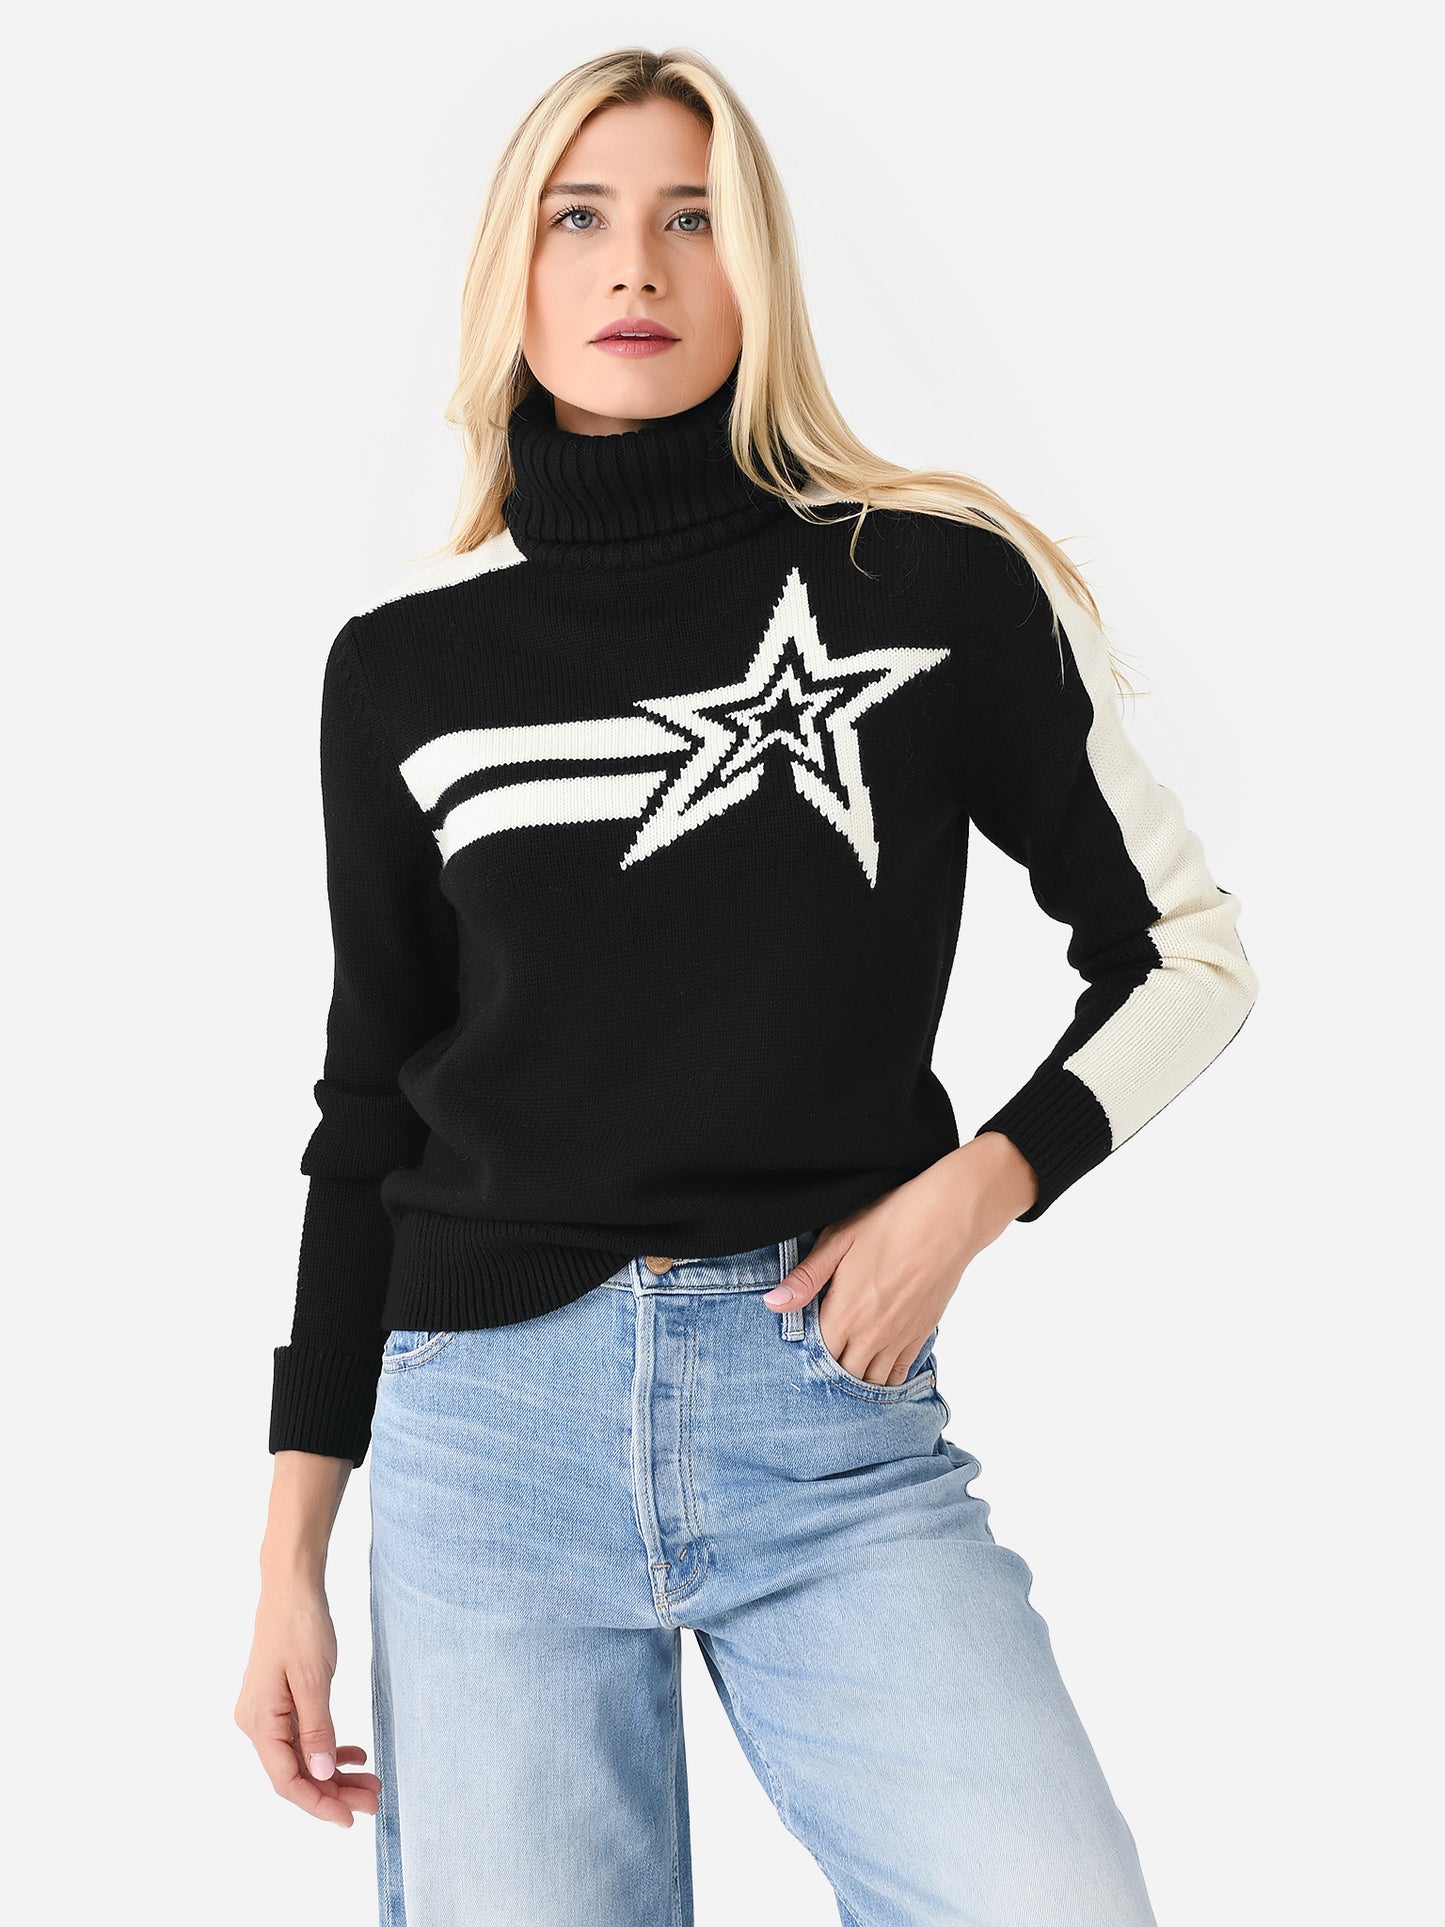 Perfect Moment Women's Claudia Sweater